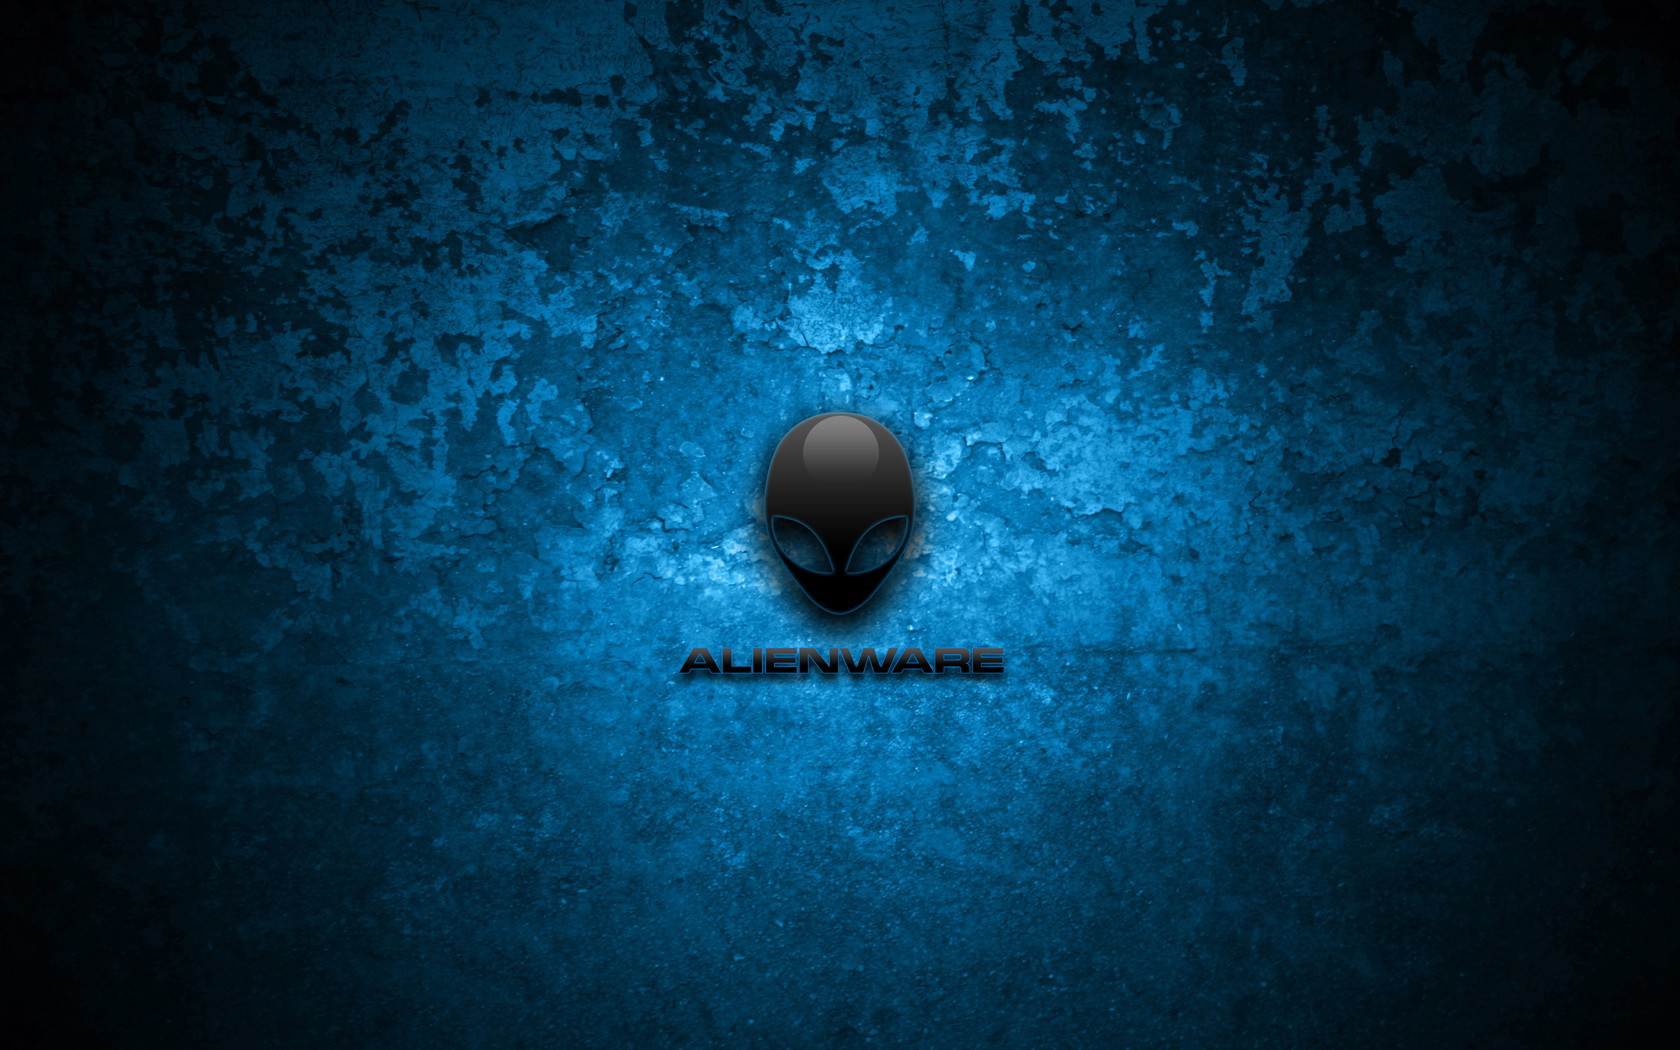 Alienware Wallpaper and Background Image | 1680x1050